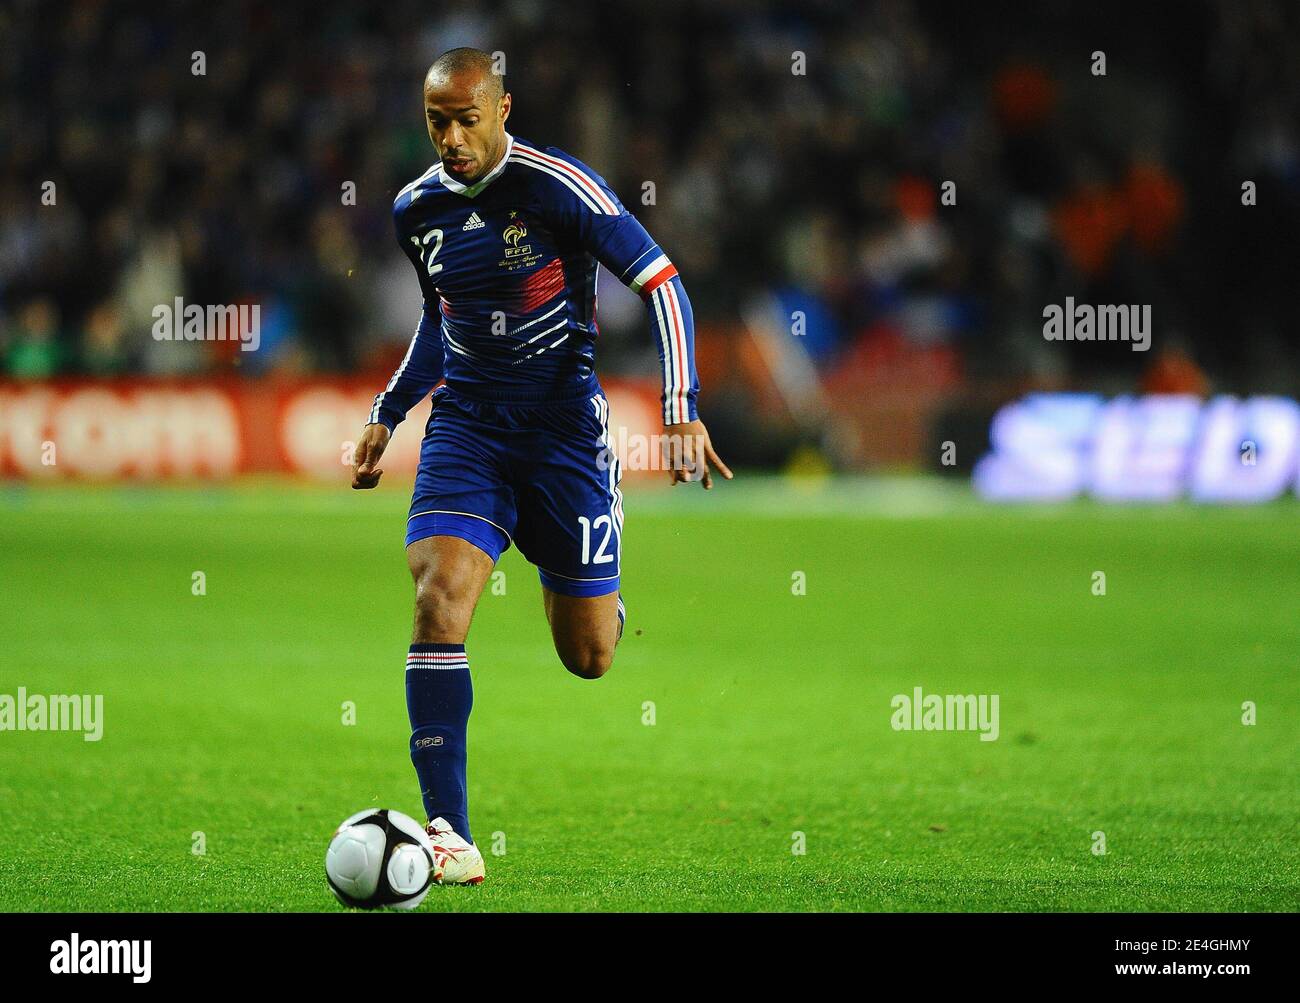 France's Thierry Henry during the World Cup 2010 Qualifying Play off soccer match, Ireland vs France at Croke Park stadium in Dublin, Ireland on November 14, 2009. France won 1-0. Photo by Steeve McMay/ABACAPRESS.COM Stock Photo